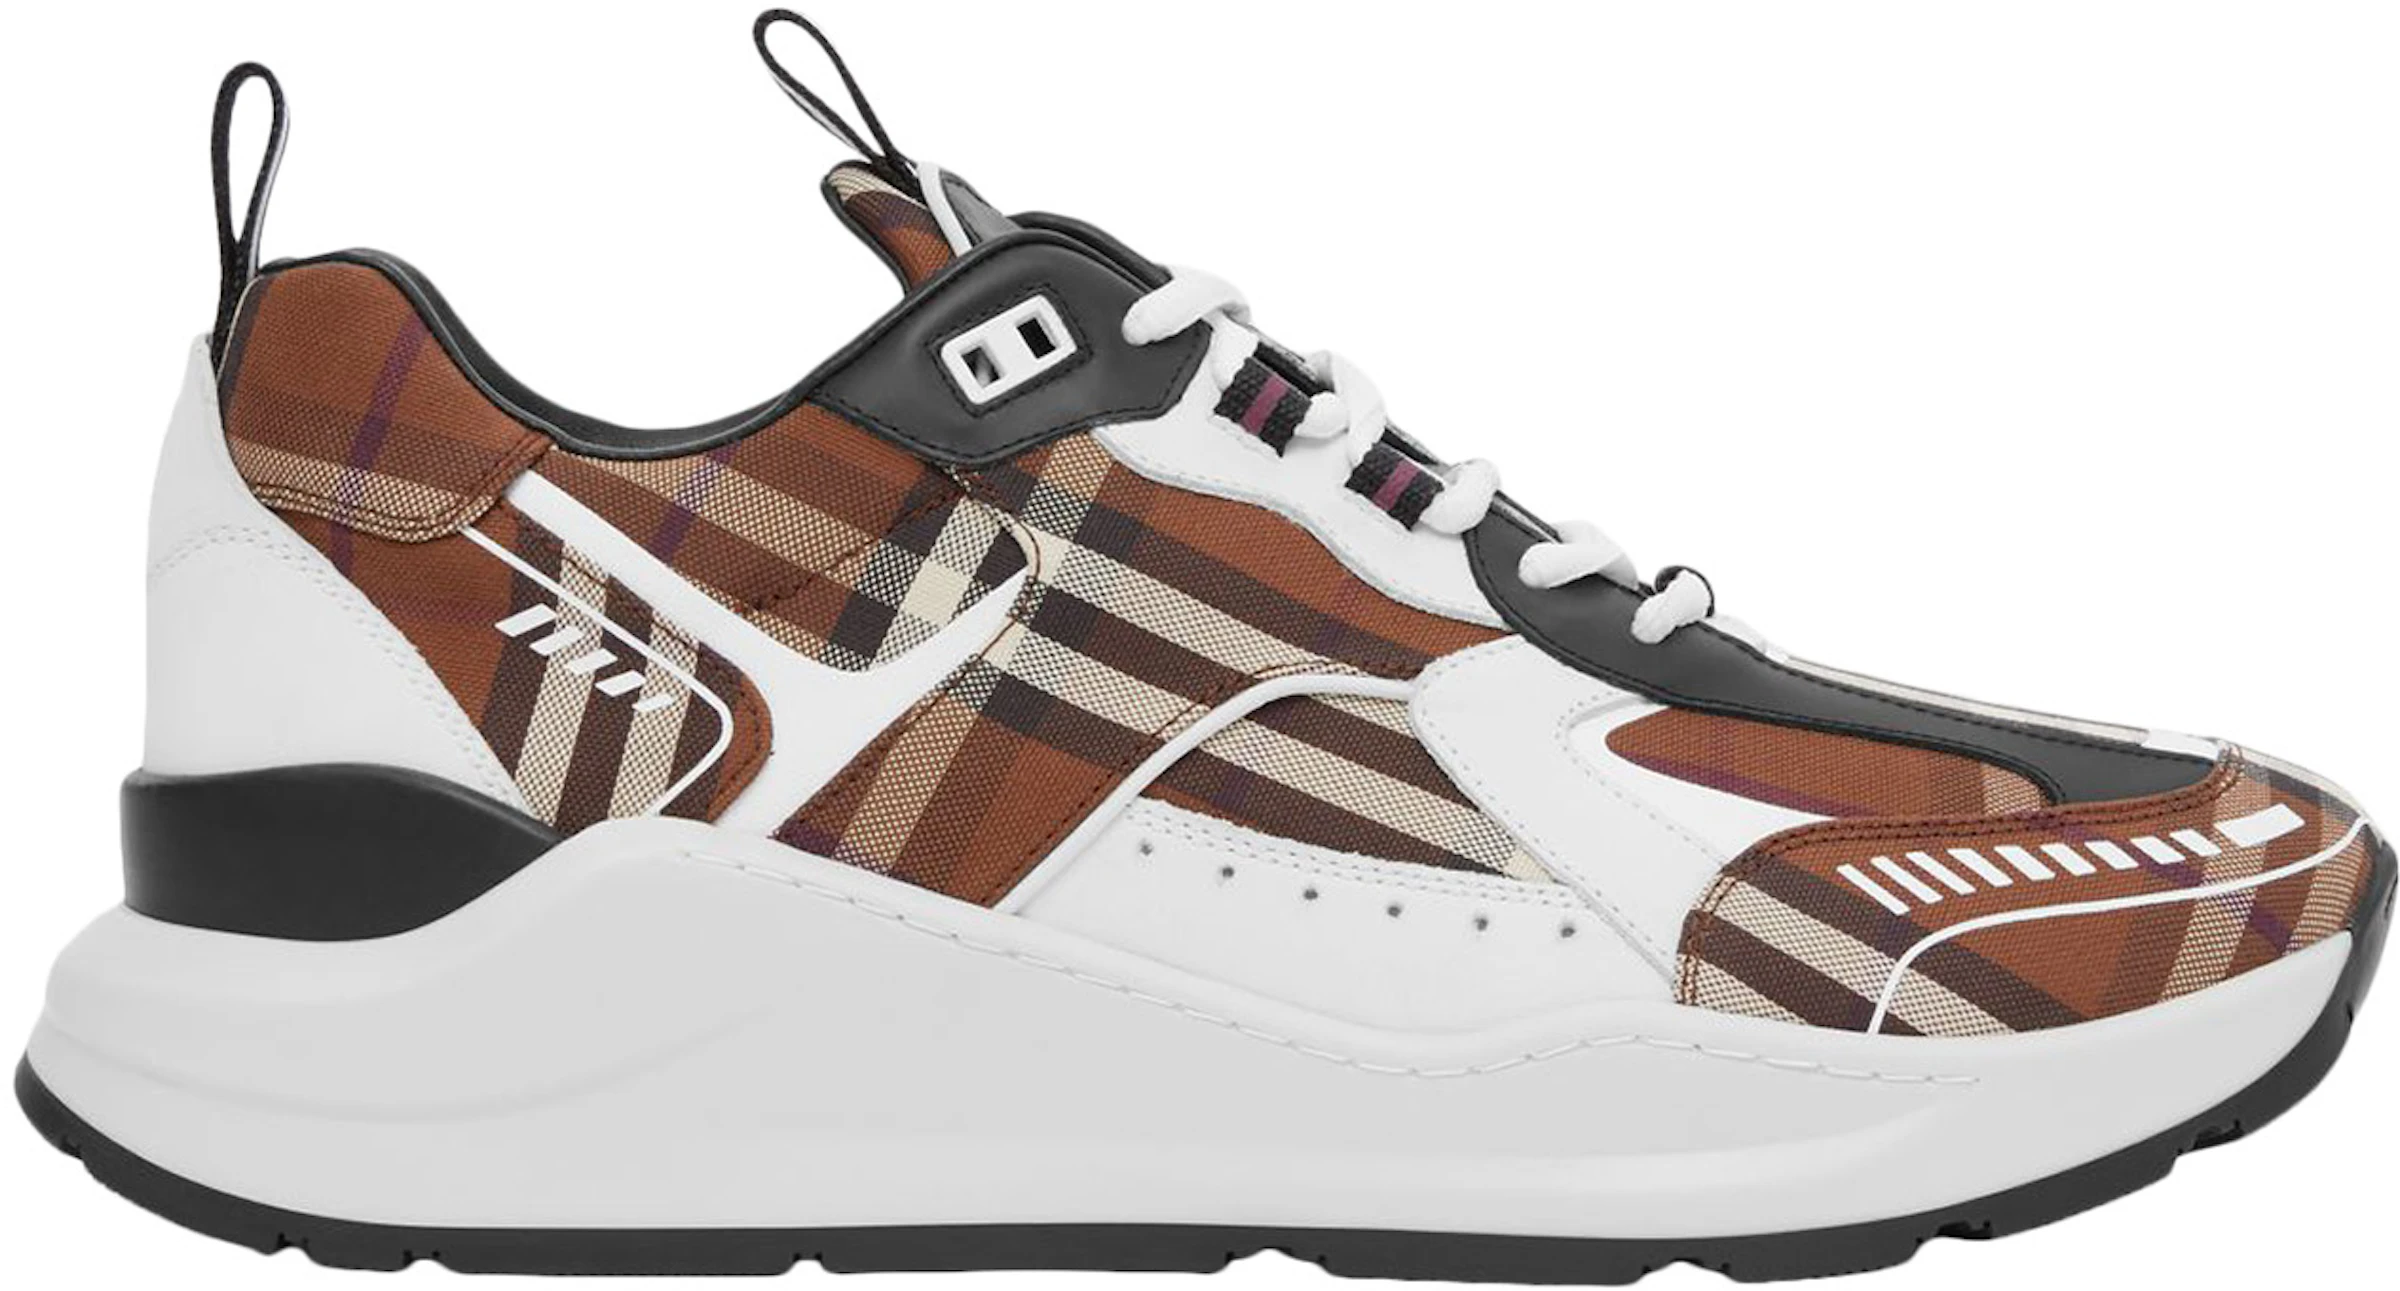 Burberry Vintage Check Cotton and Leather Sneakers Dark Birch Brown White -  80642821 - US